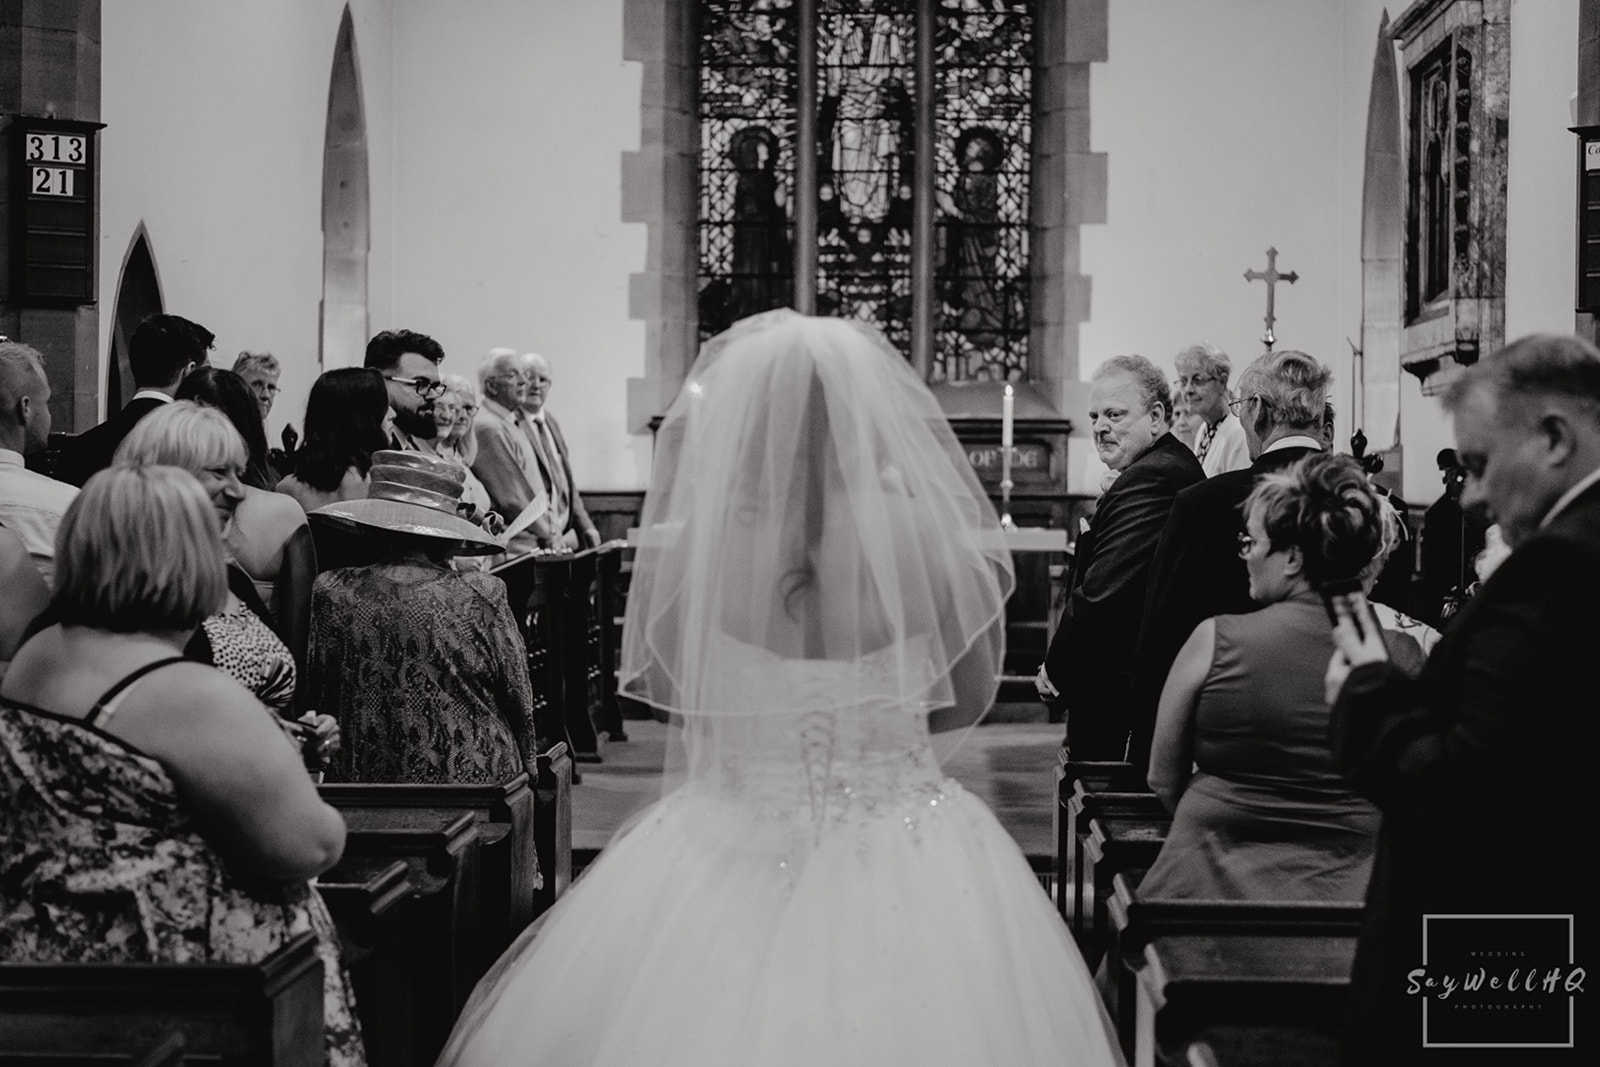 Documentary Wedding Photography Portfolio - Andy Saywell - groom watching as his bride walks down the aisle